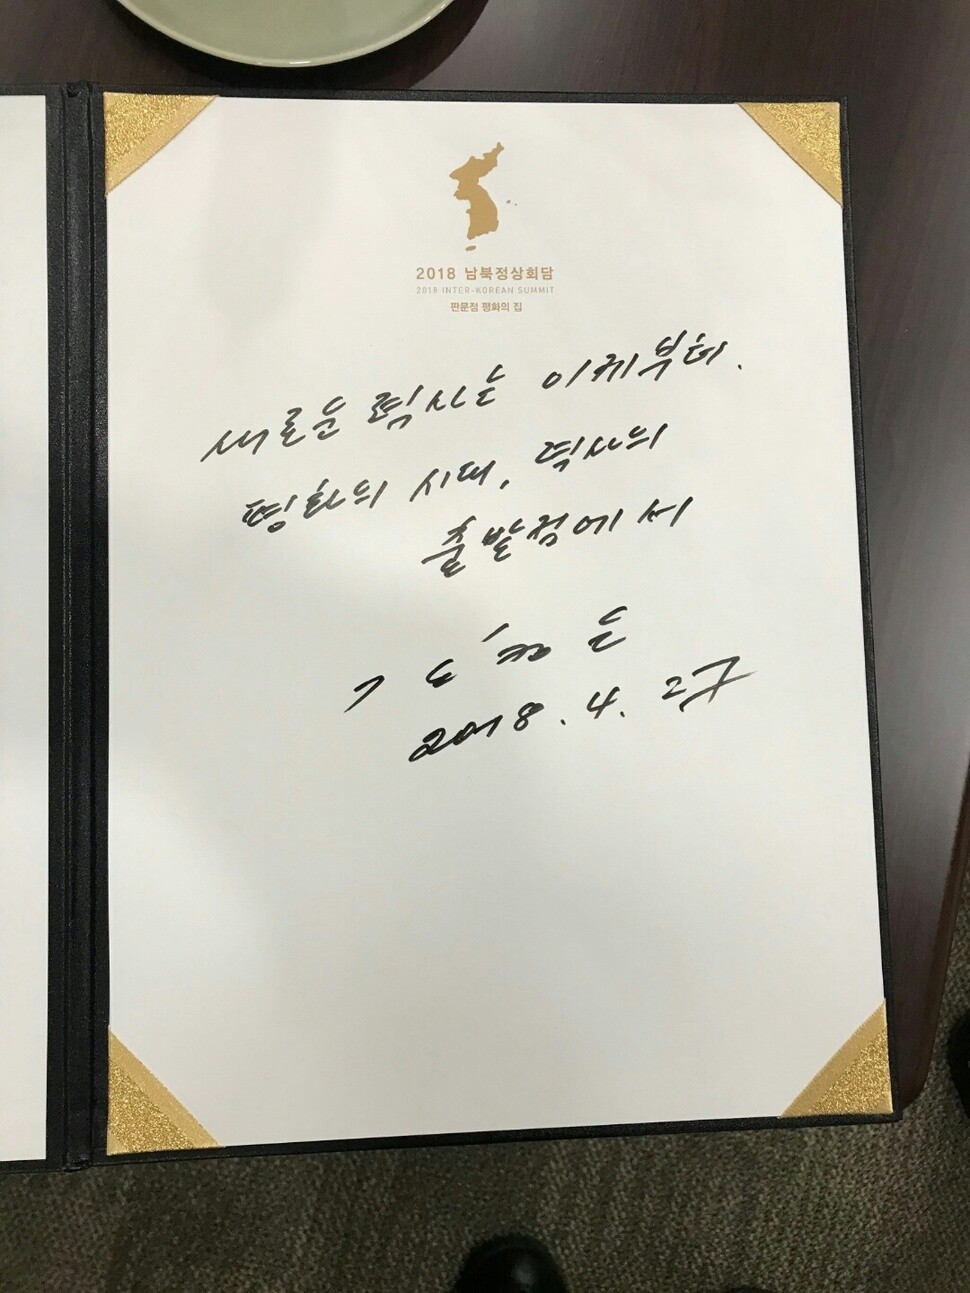 A message written by North Korean leader Kim Jong-un in the guestbook at the House of Peace reads